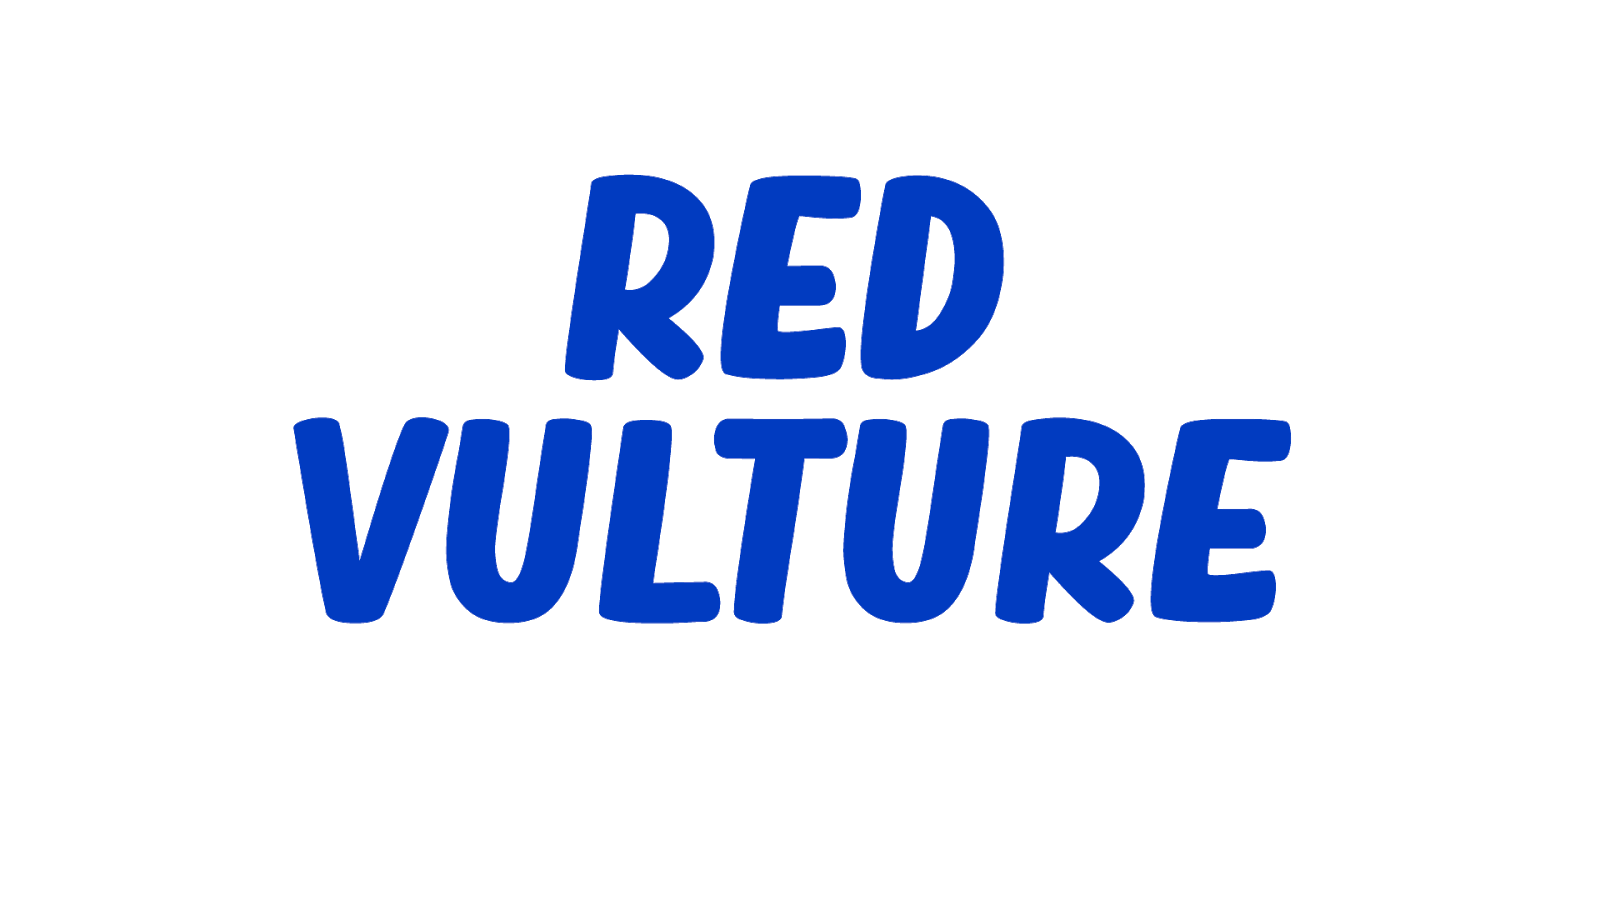 Red Vulture Gaming